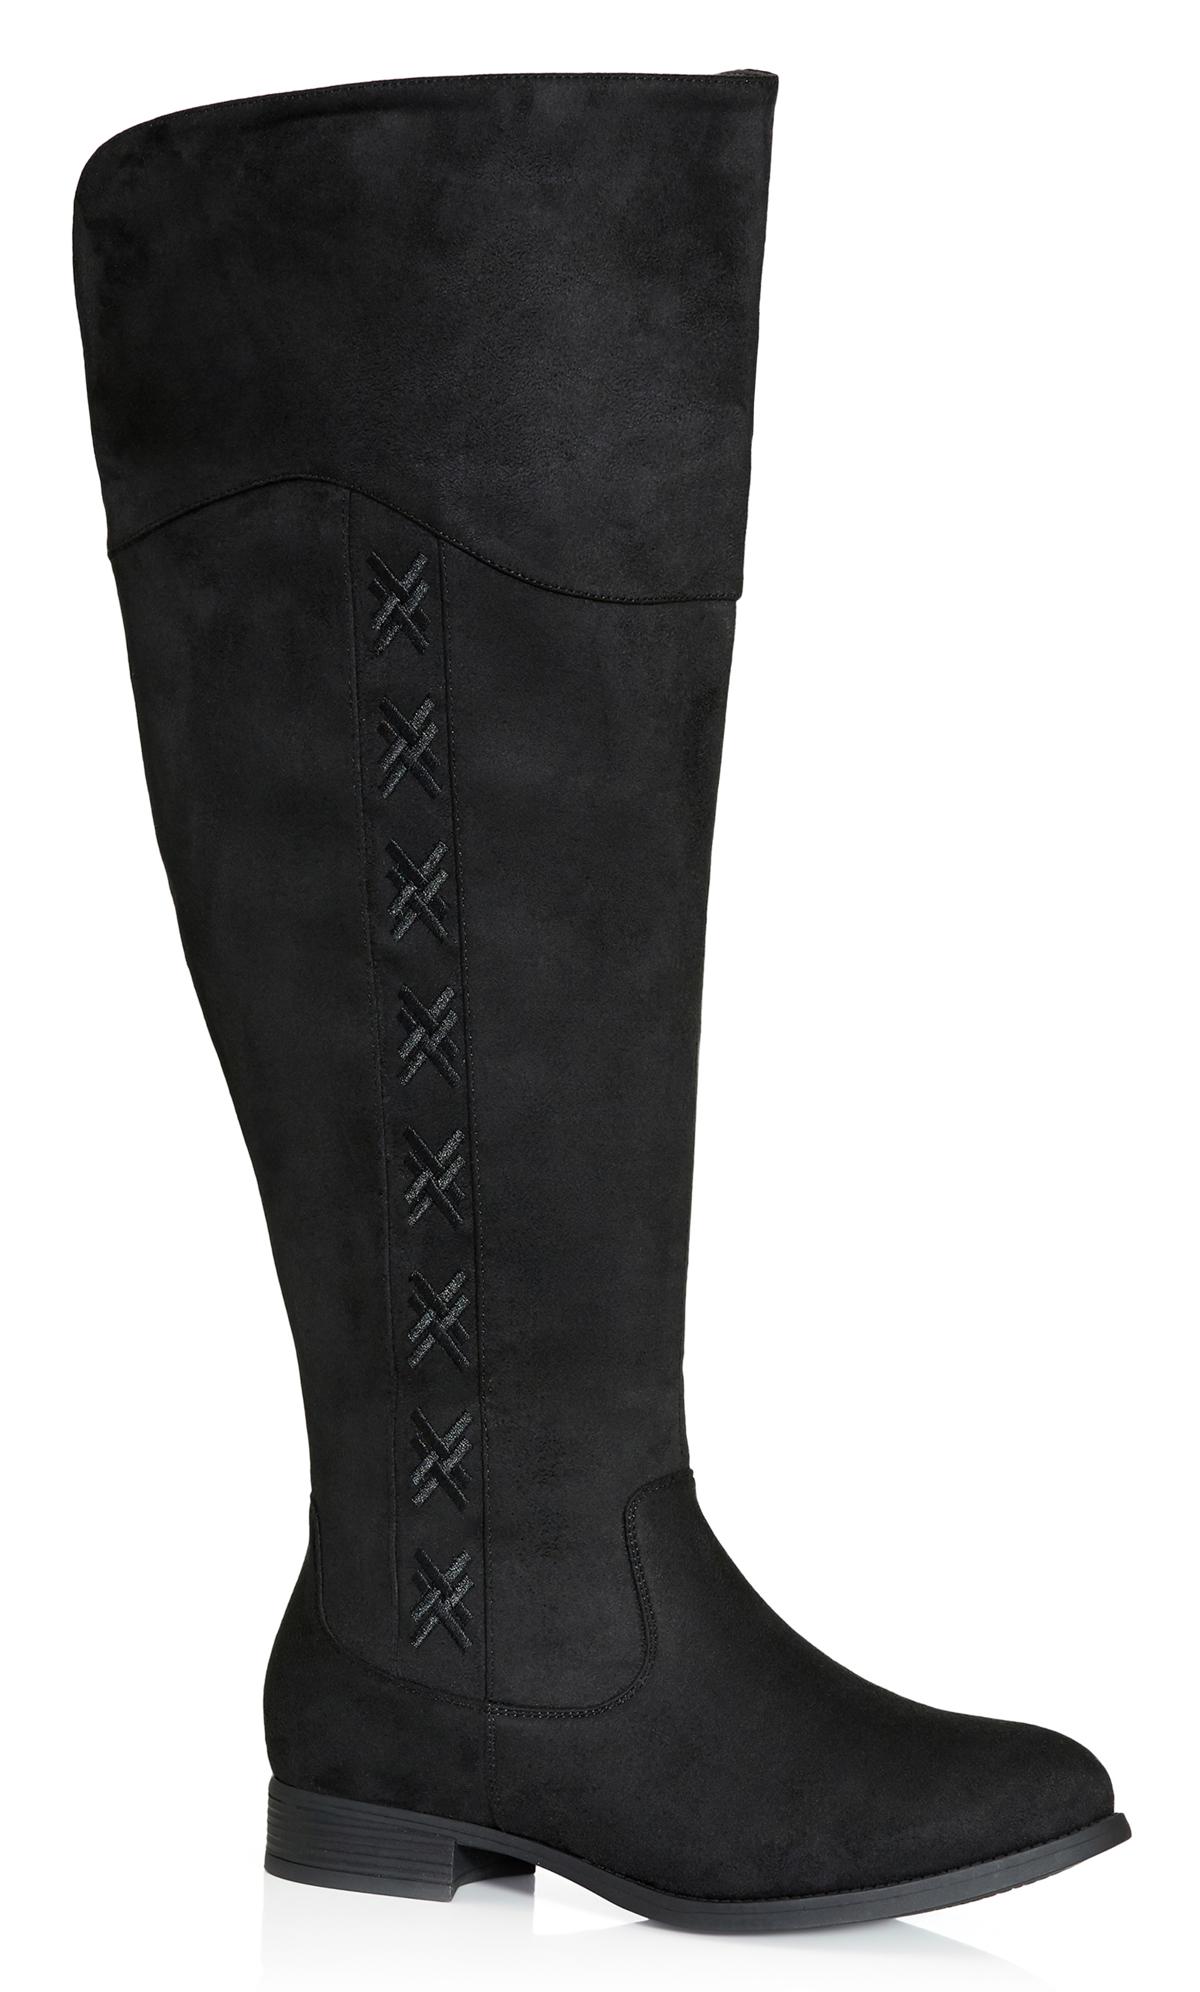 Evans EXTRA WIDE Black Embroided Knee High Boots 1